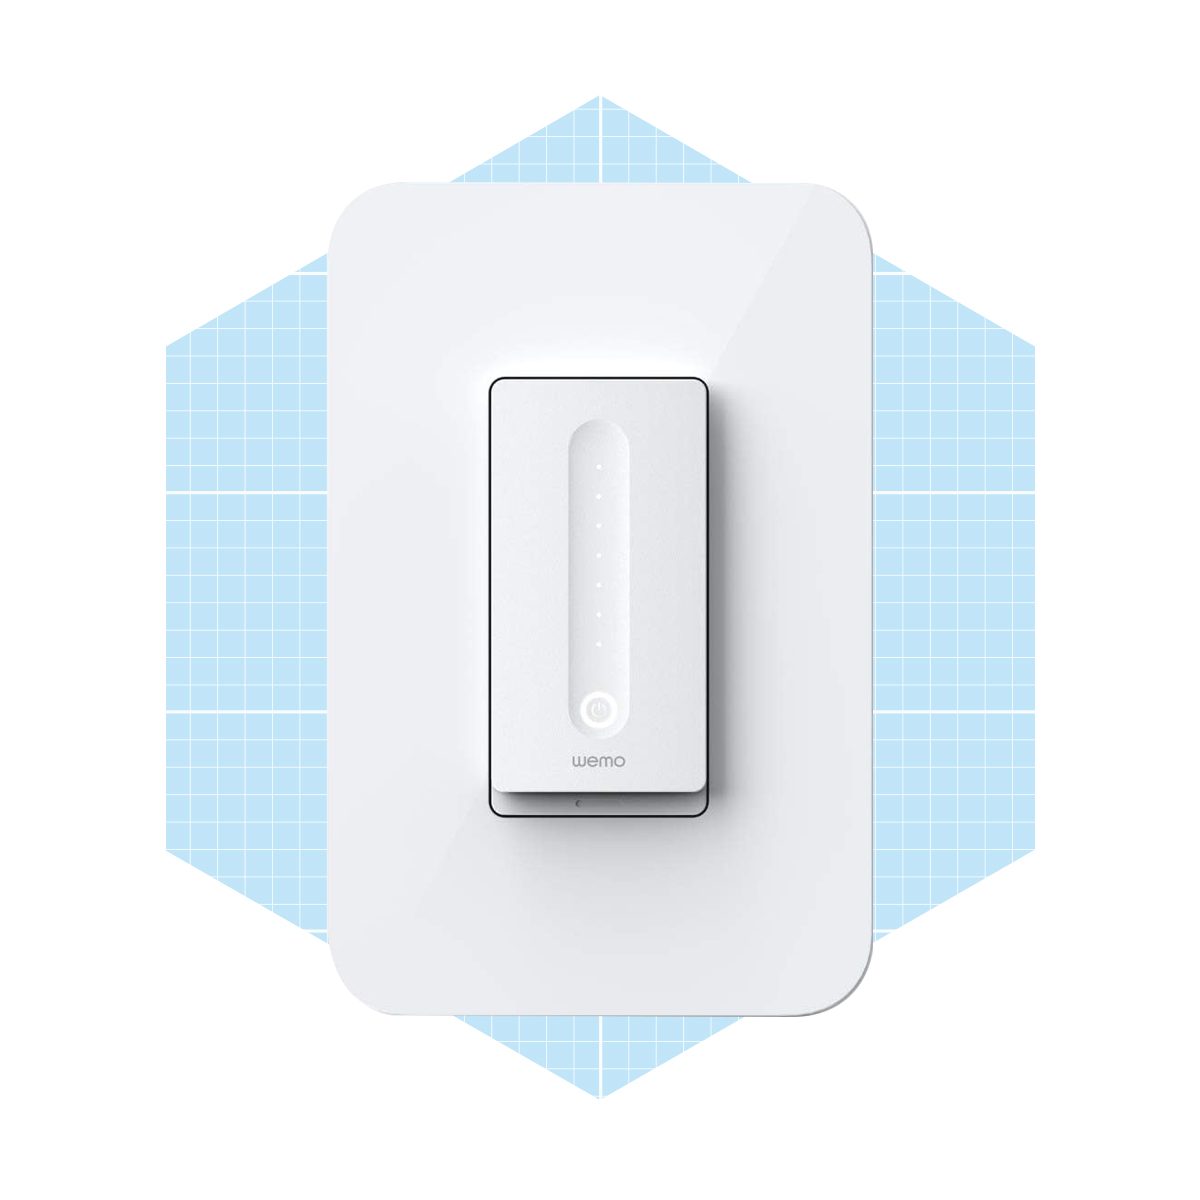 https://www.familyhandyman.com/wp-content/uploads/2020/05/WeMo-WiFi-Smart-Dimmer-Switch-Dim-Control-Lights-from-Anywhere-ecomm-amazon.com_.jpg?fit=700%2C700